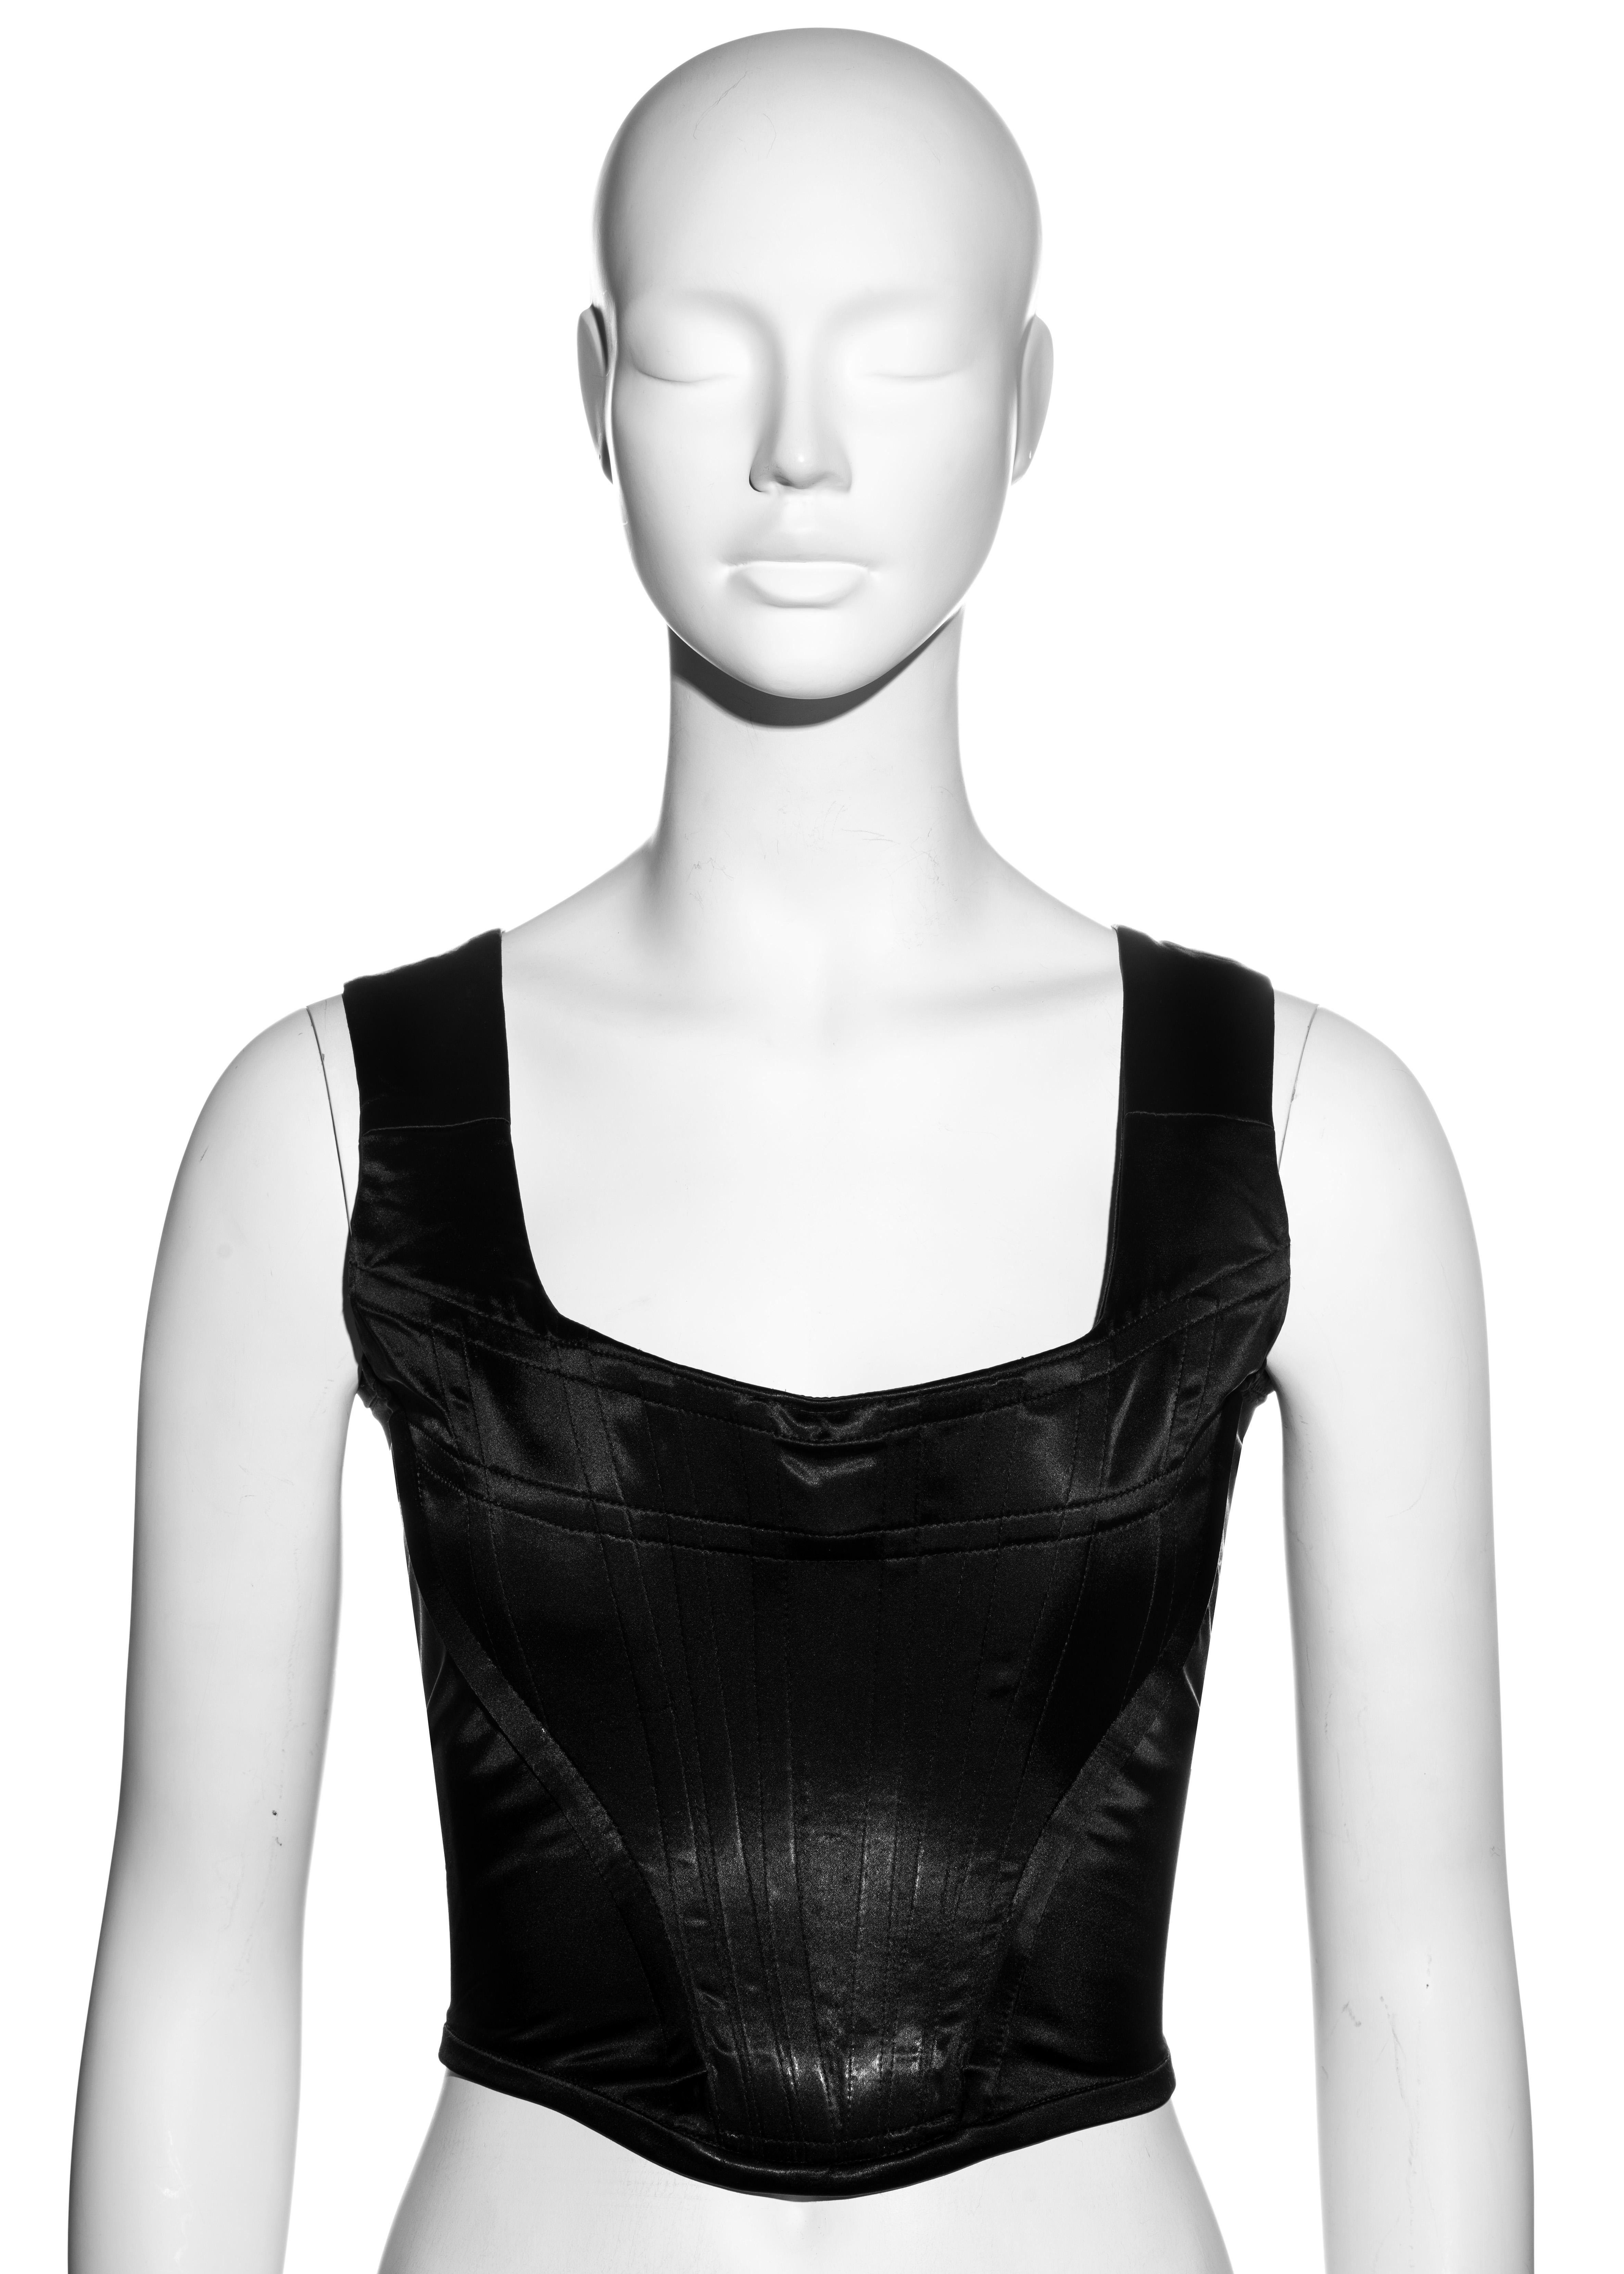 ▪ Vivienne Westwood black satin evening corset
▪ Boning designed to cinch the waist and push breasts up 
▪ Back zip fastening
▪ FR 38 - UK 10 - US 6 (runs small)
▪ c. 1994-1998